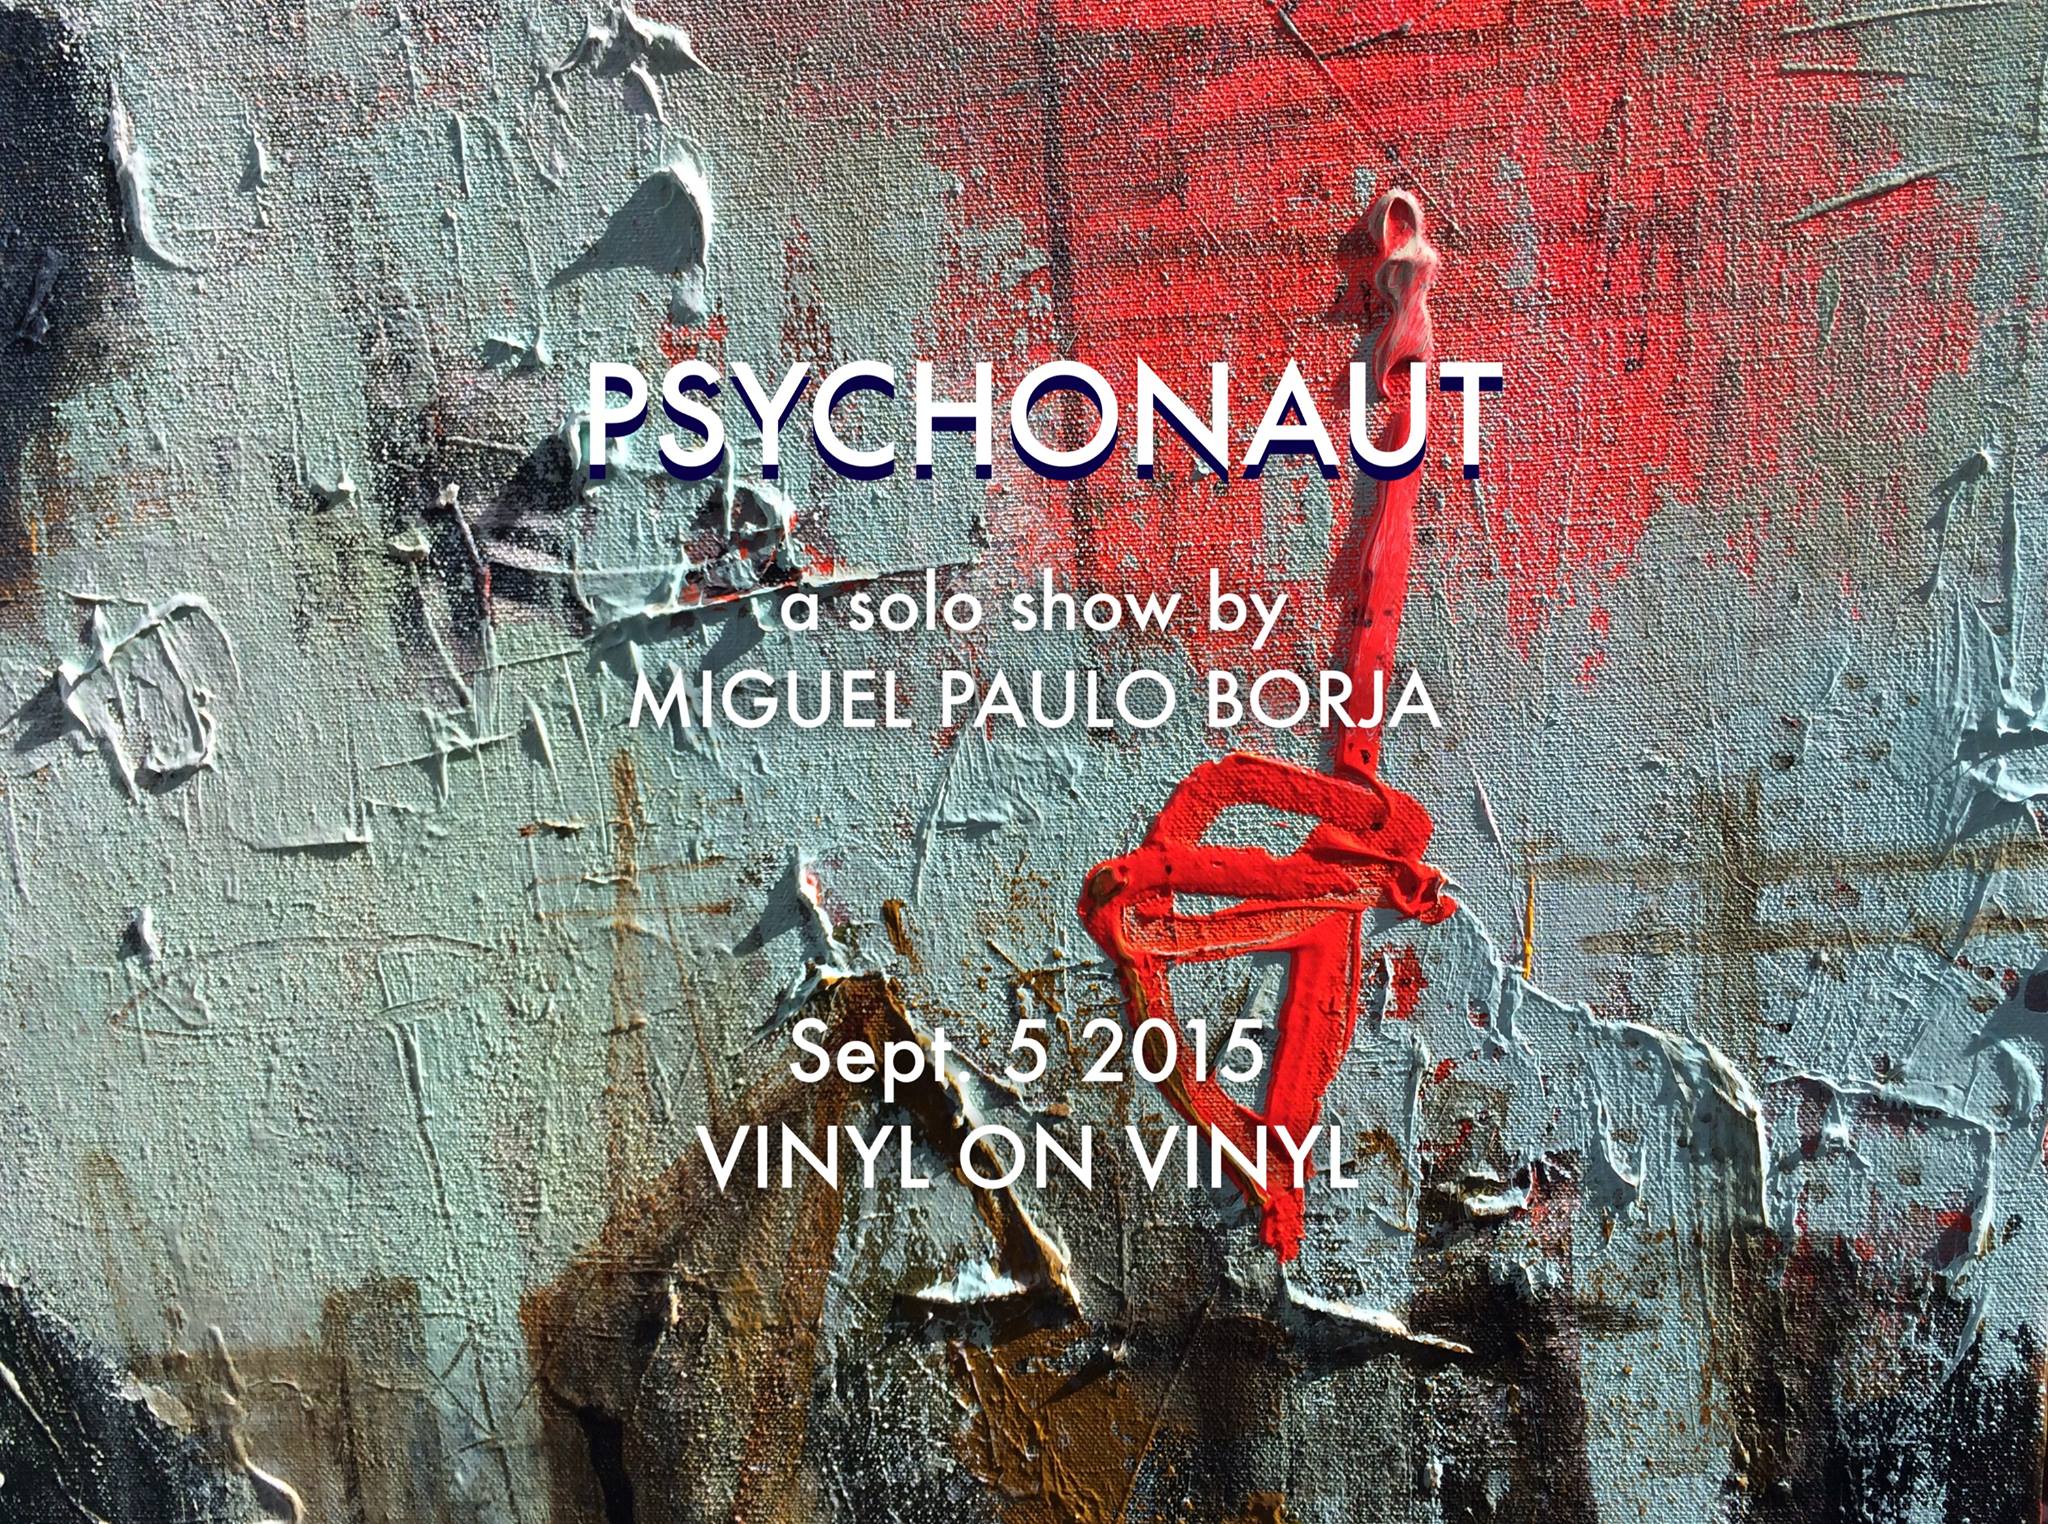 Psychonaut by Miguel Paulo Borja     Saturday, September 5     at 6:00pm     3 days from now · 88°F / 74°F Thunderstorm     	     Show Map     Vinyl on Vinyl     1230 Makati, Philippines     	     Invited by VinylonVinyl Art Humanity, in comparison to the rest of the universe, is a relatively new concept. But despite their short tenure they have become witnesses to exponential leaps in evolution and consciousness, and arguably, are the catalysts to an age of awareness and technological singularity. One of the best manifestations of this technological advancement is space travel. Always drawn towards the unknown, man’s insatiable curiosity has taken them beyond the bounds of earth and into the uncertainty of space. They’ve hurtled themselves countless of times into the abyss in the hopes of a deeper understanding of something greater. Many ancient belief systems have revolved around the worship of the cosmos, and it's not difficult to wonder why. The vast and panoramic expanse of the night sky spurns irony as much as it does curiosity. It can be both a spiritual experience as well as a reflection of man’s fear of it and the need to fathom it: a merging of science and spirituality; a movement outwards as much as it is inwards. As man ventures out to discover if there is life beyond earth, a small part of humanity’s transdimensional loneliness is alleviated. The reason for man’s insatiable curiosity is simple then - it is the basic and universal need for a genuine human connection. There is a certain sense of longing that can be felt from the figures in Miguel Paulo Borja's paintings - a sort of bittersweet irony that is a reflection of the human condition; a certain beauty in their tragedy. He paints* scavengers, wanderers and transients, in search of purpose to their being, navigating through a world that looks familiar but feels entirely alien. Psychonaut is Borja's realization that man is meant to plunge themselves into the depths of darkness, e